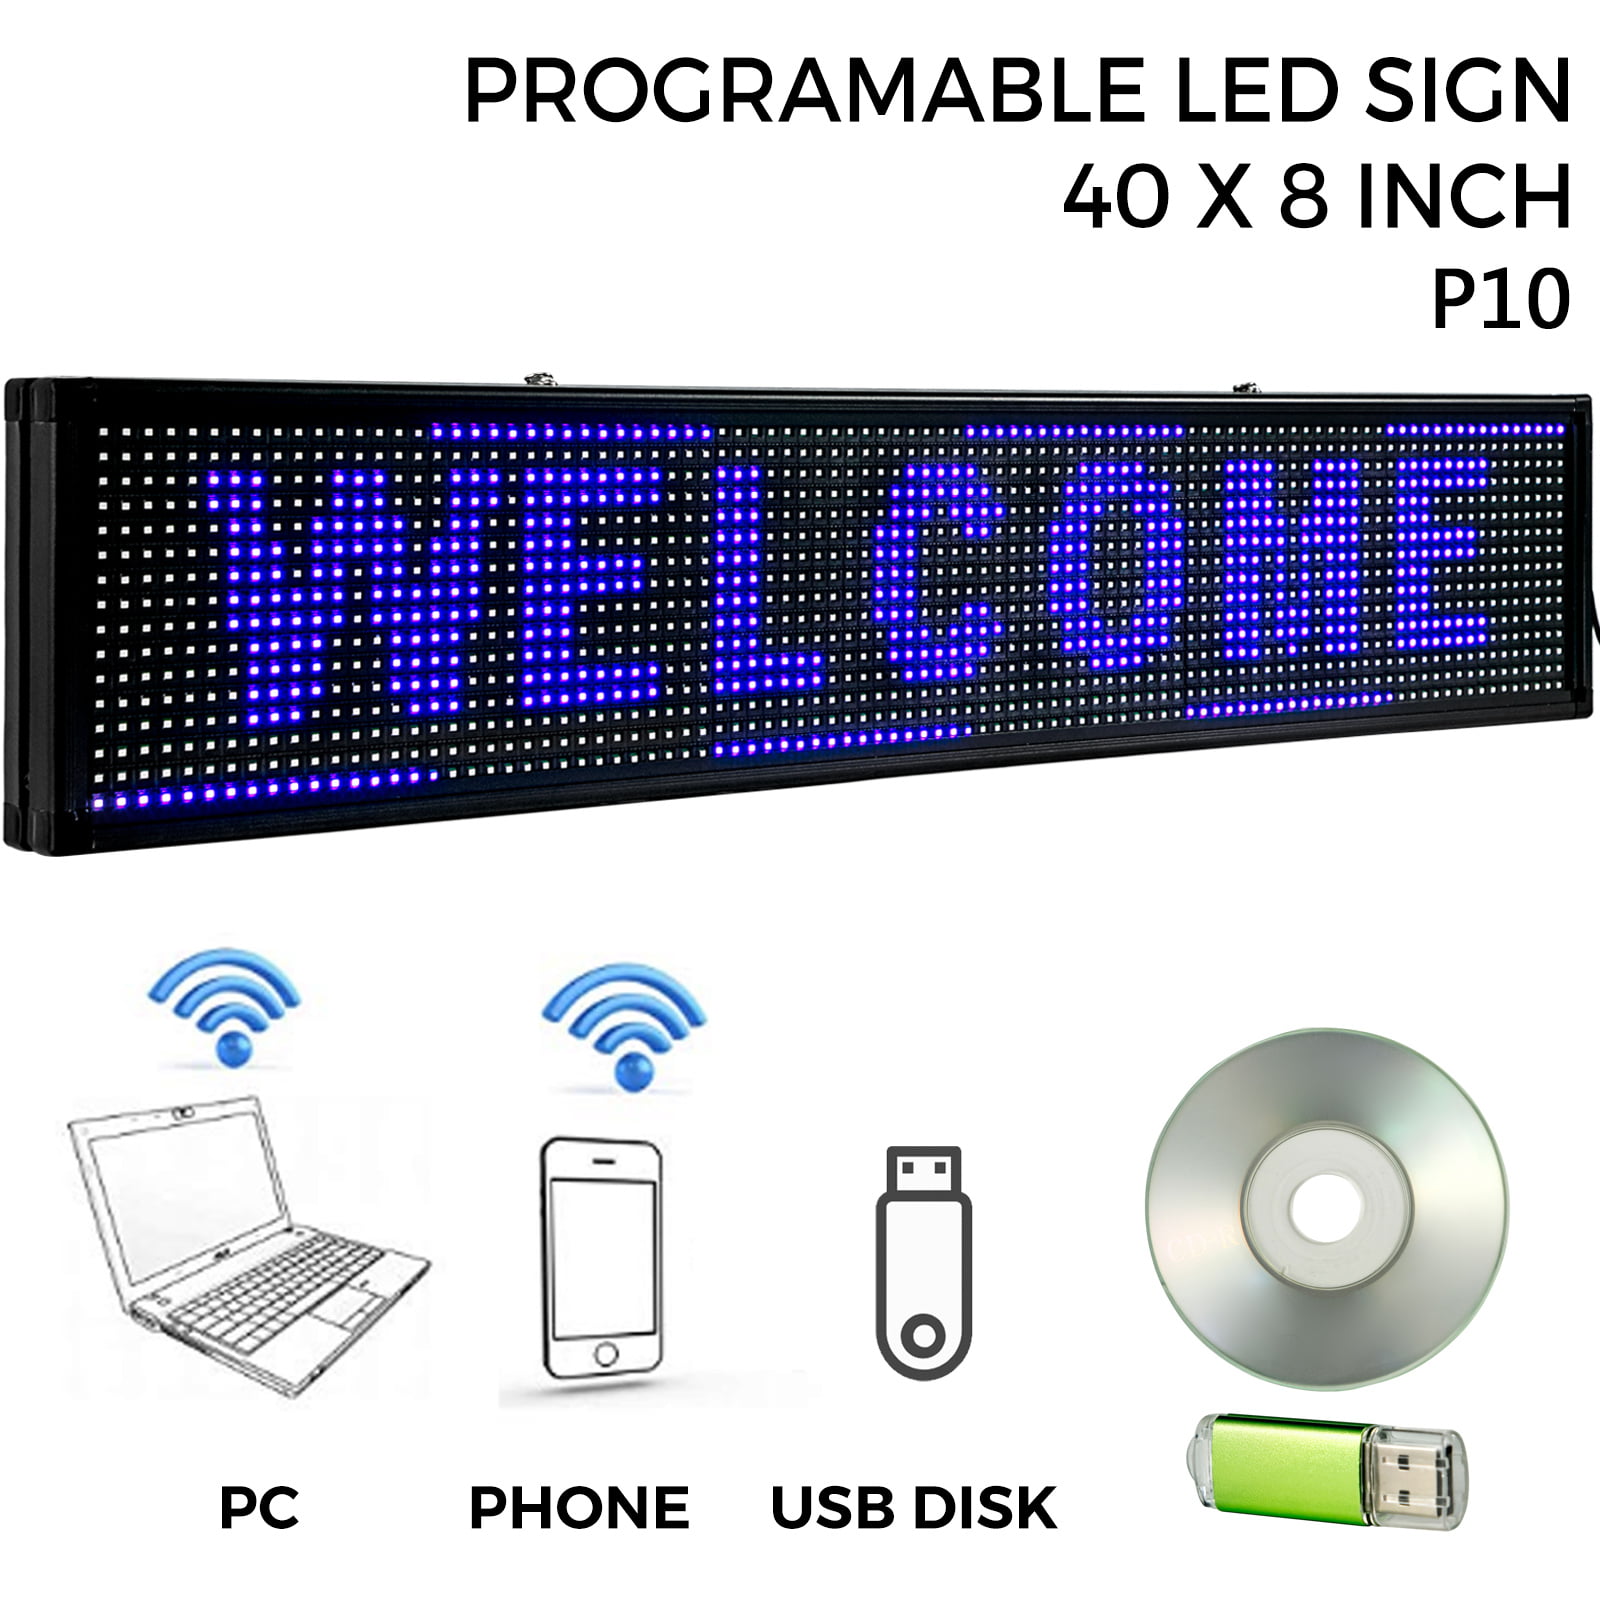 USB WiFi HD Full Color P10 LED Scrolling Sign Programmable Display Advertising